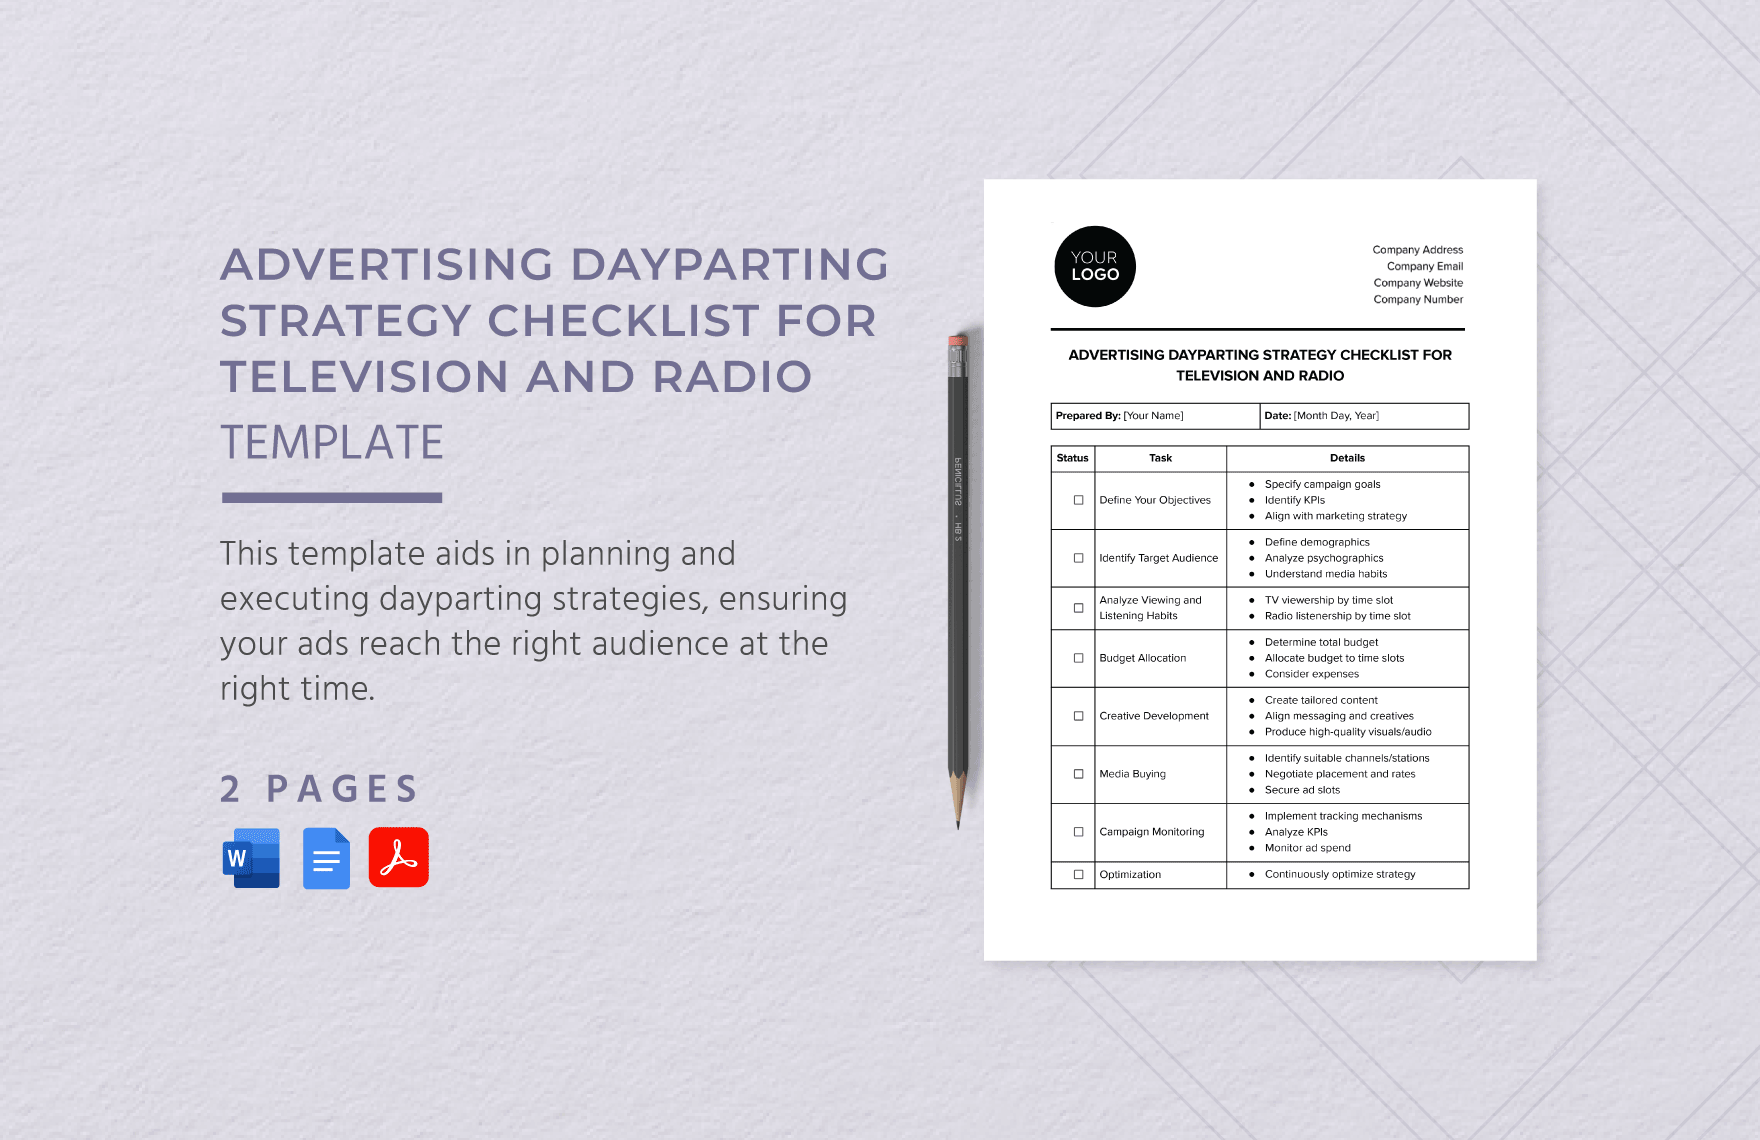 Advertising Dayparting Strategy Checklist for Television and Radio Template